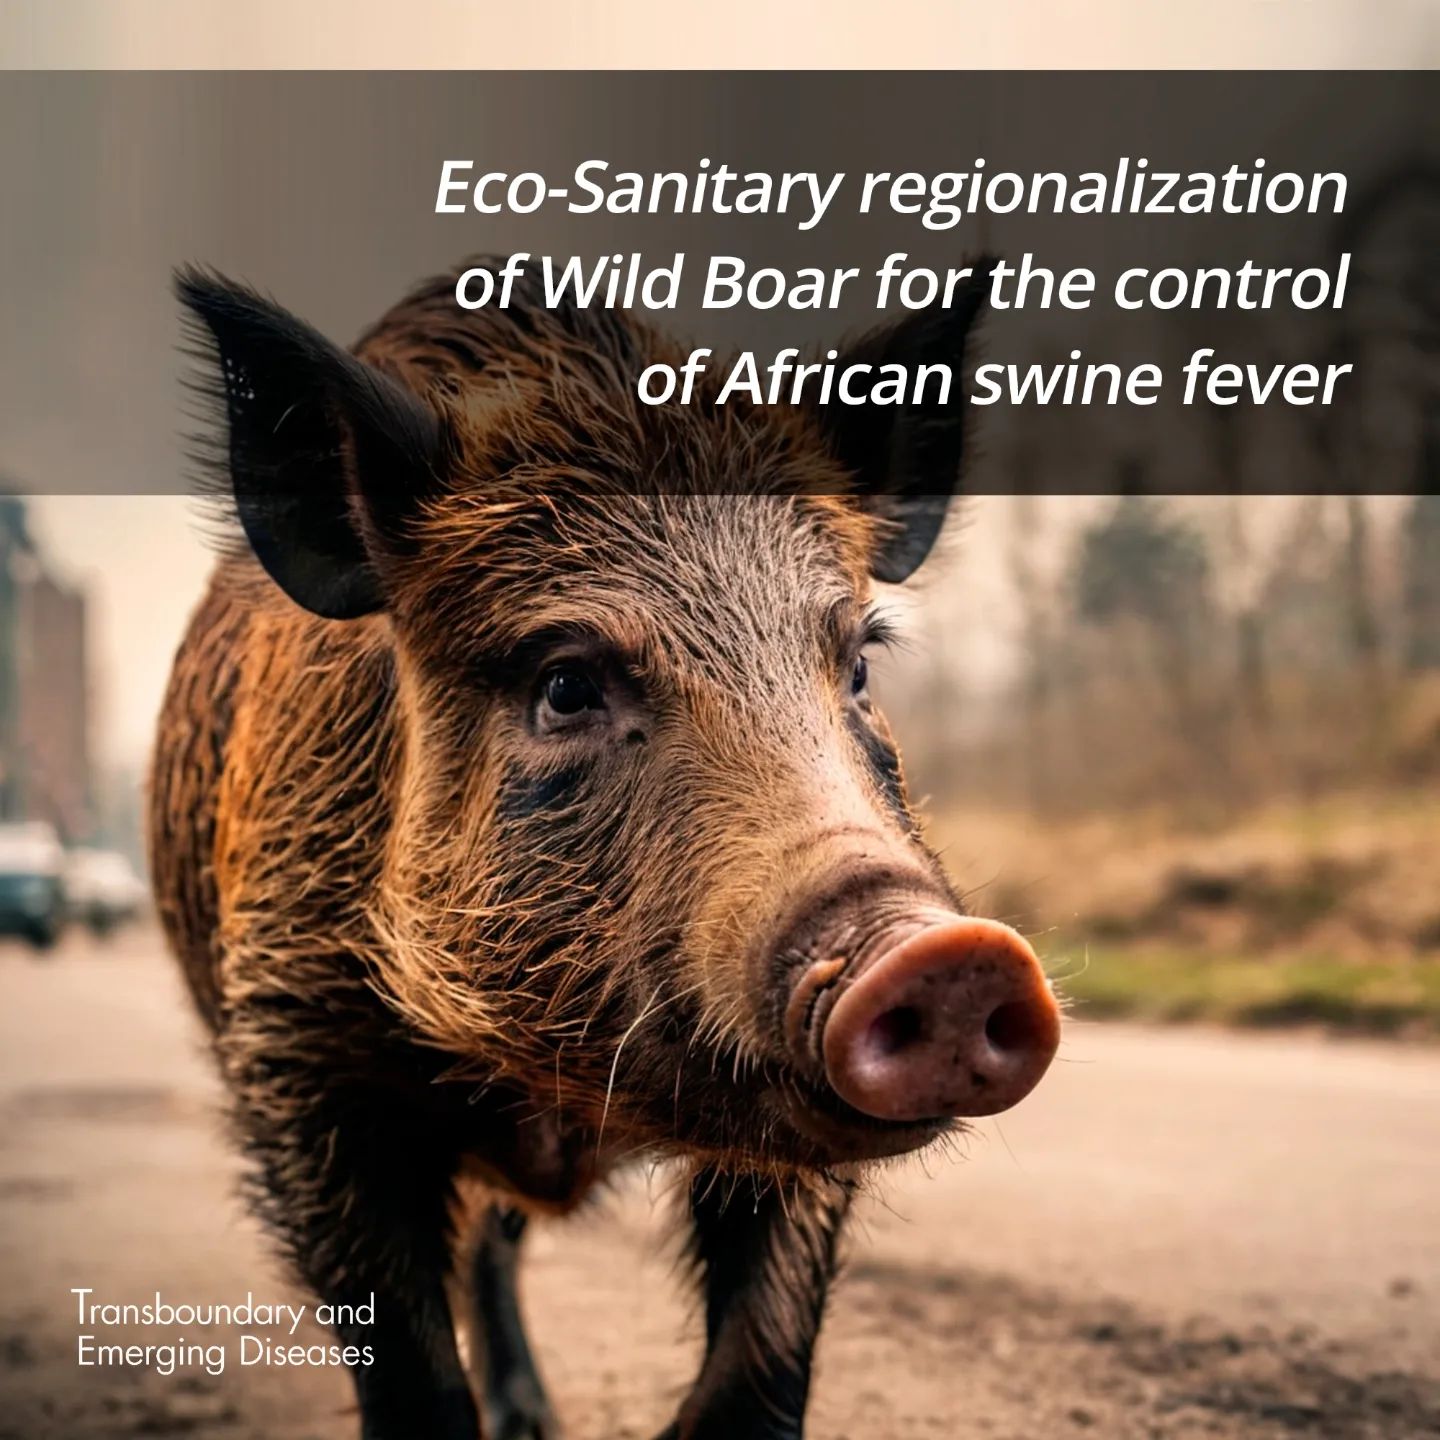 Eco-Sanitary Regionalization of Wild Boar (Sus scrofa) in the Western Palearctic Realm as a Tool for the Stewardship of African Swine Fever